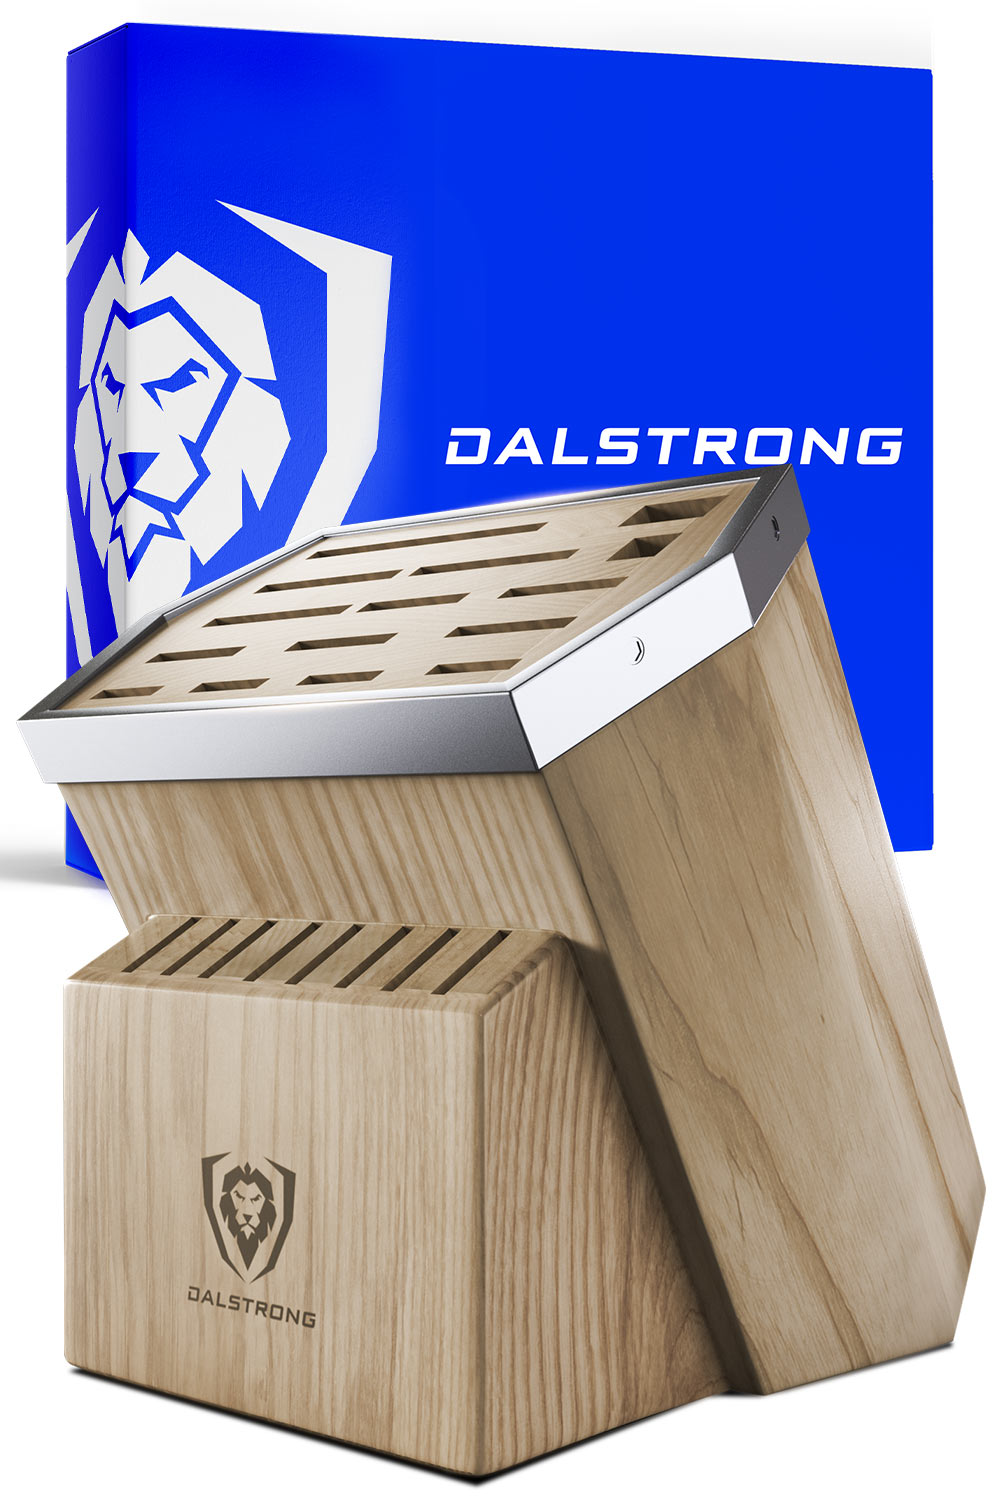 Dalstrong 23 slots universal knife block in front of it's premium packaging.